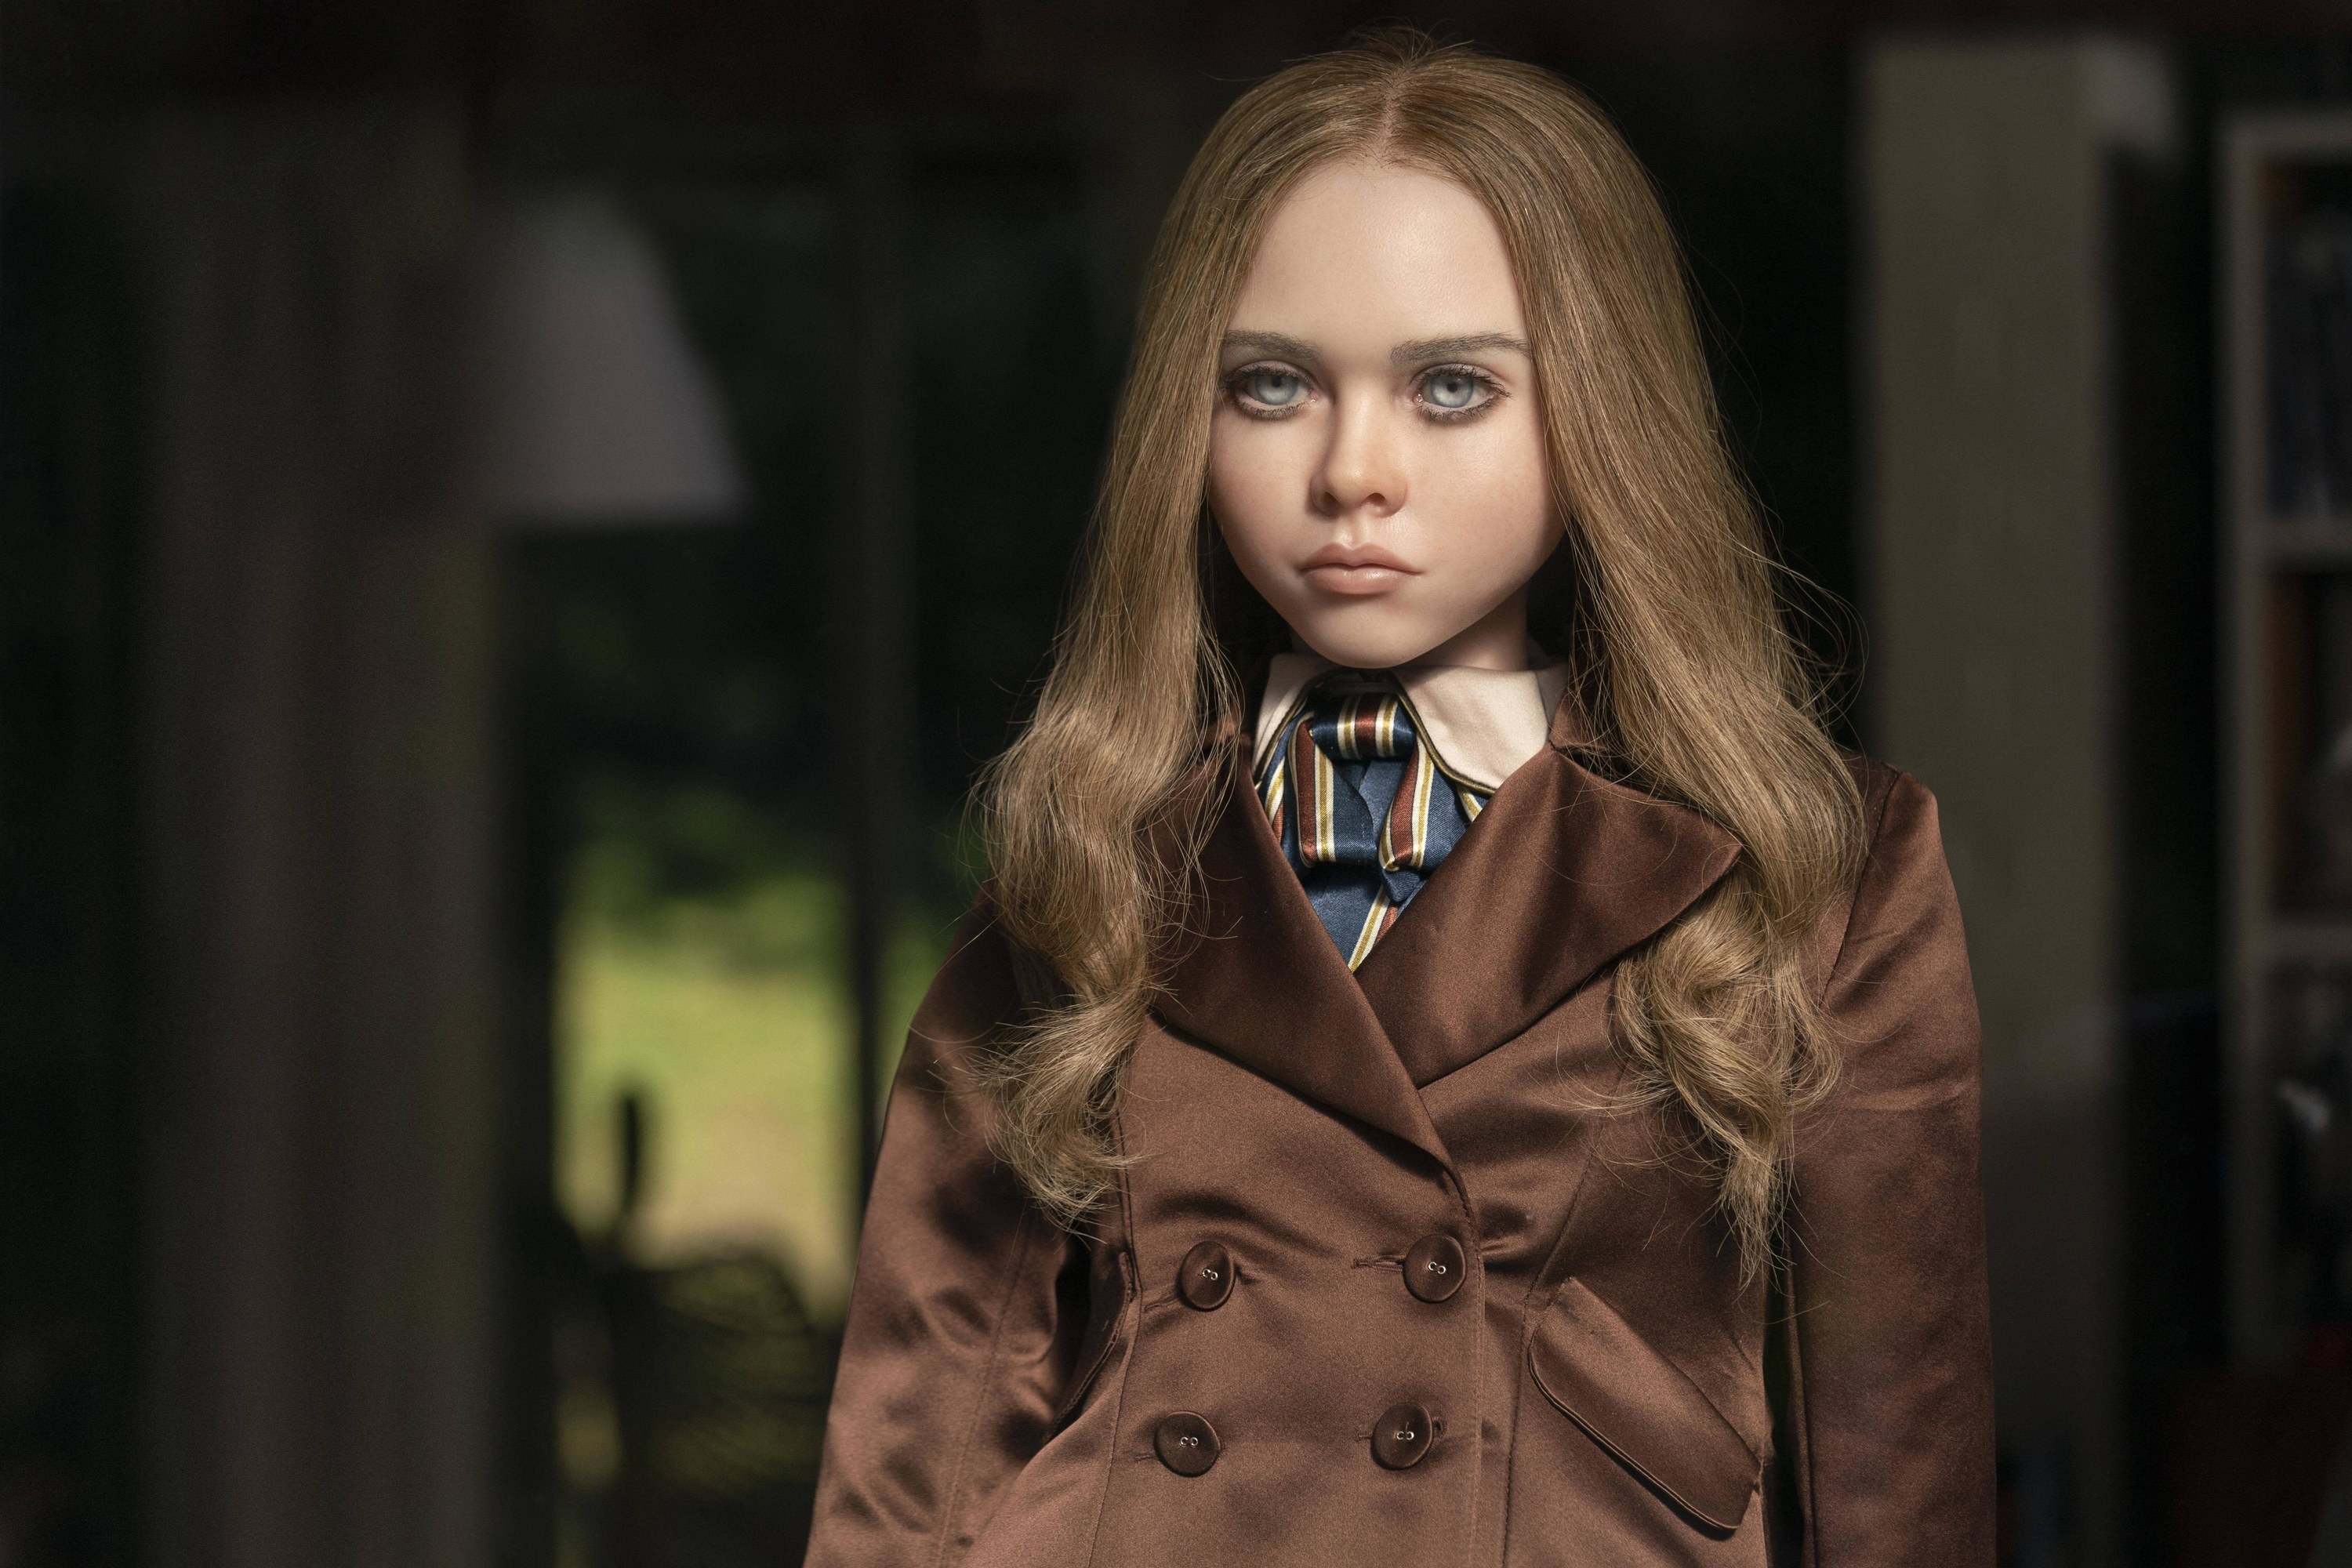 A life-like little girl doll in a brown button-up coat stares ominously outside of a window